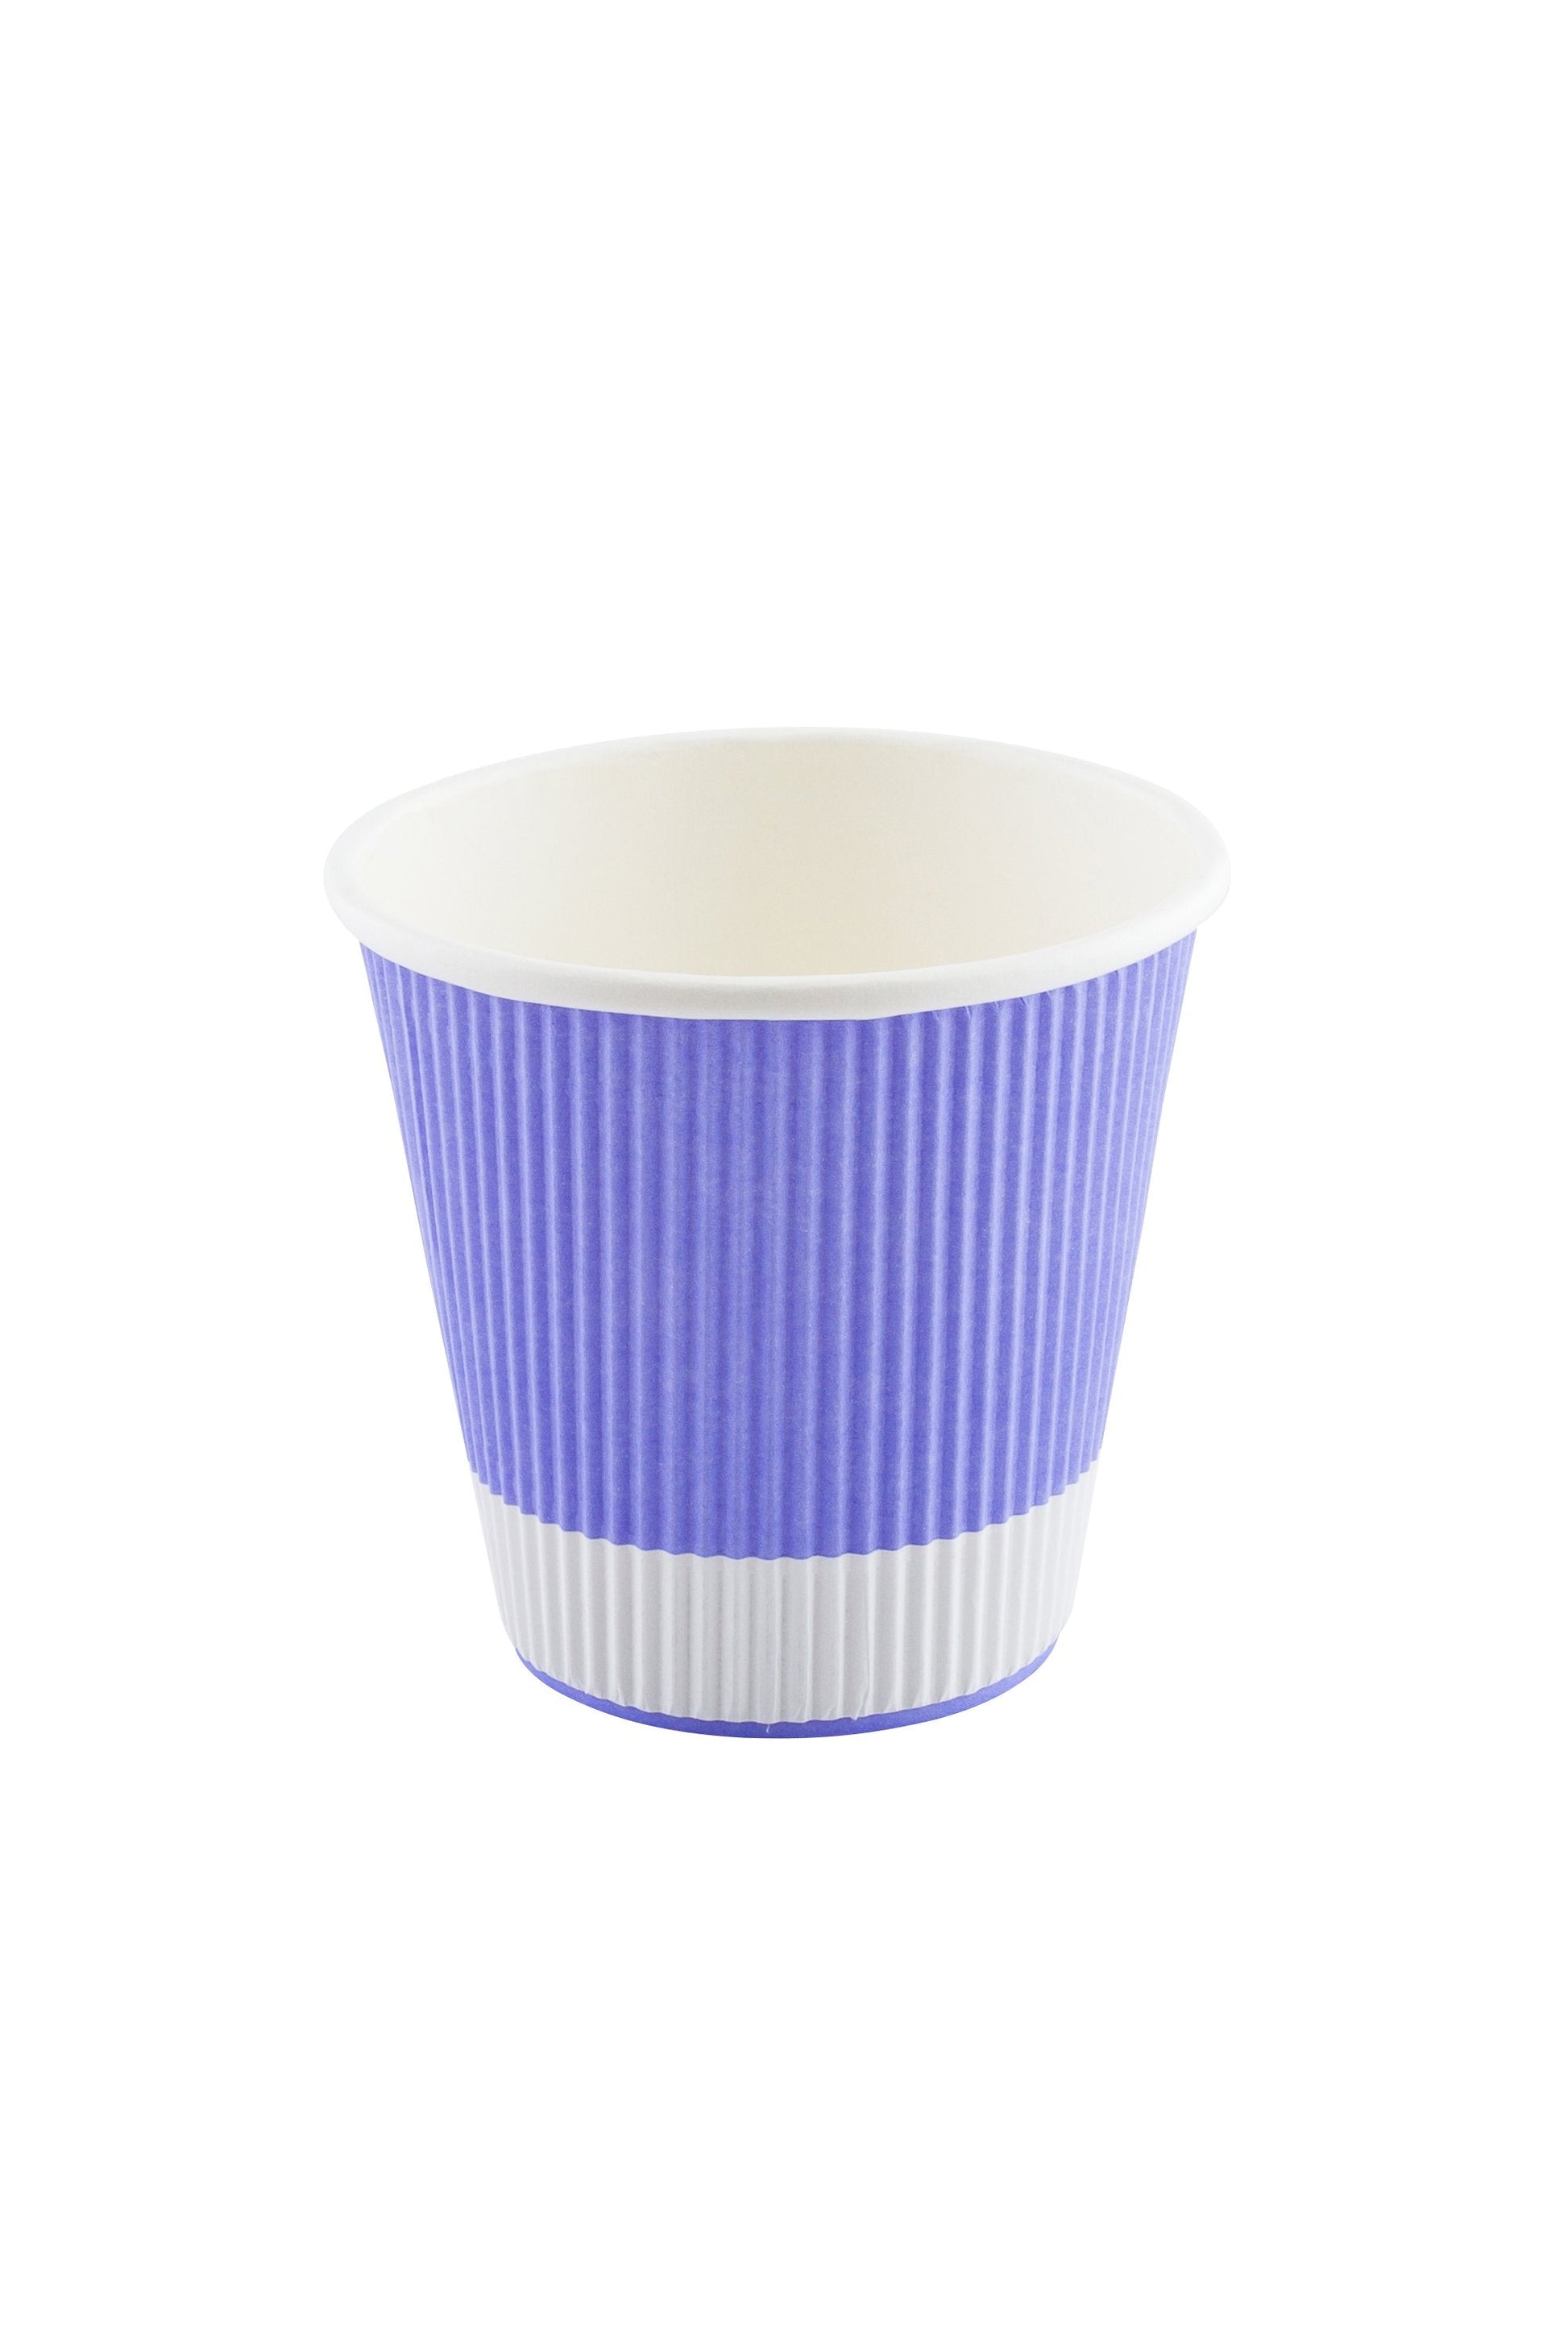 8 oz Light Purple Paper Coffee Cup - Ripple Wall - 3 1/2" x 3 1/2" x 3 1/4" - 500 count boxwww.ecoware.ae                               